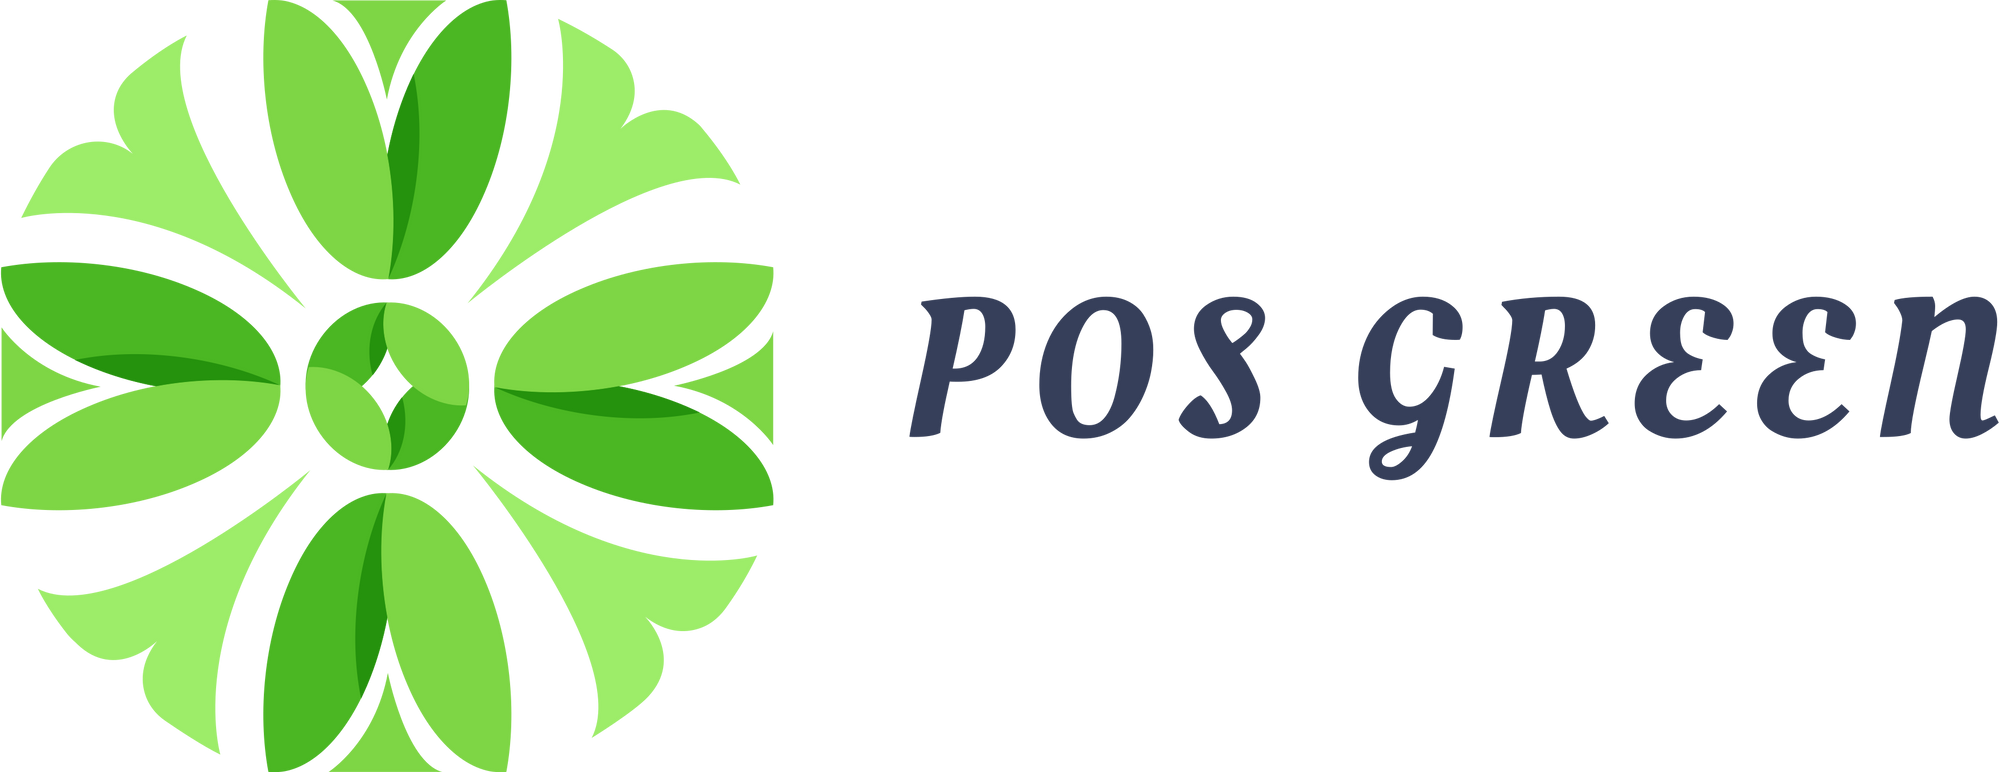 GO GREEN WITH POS